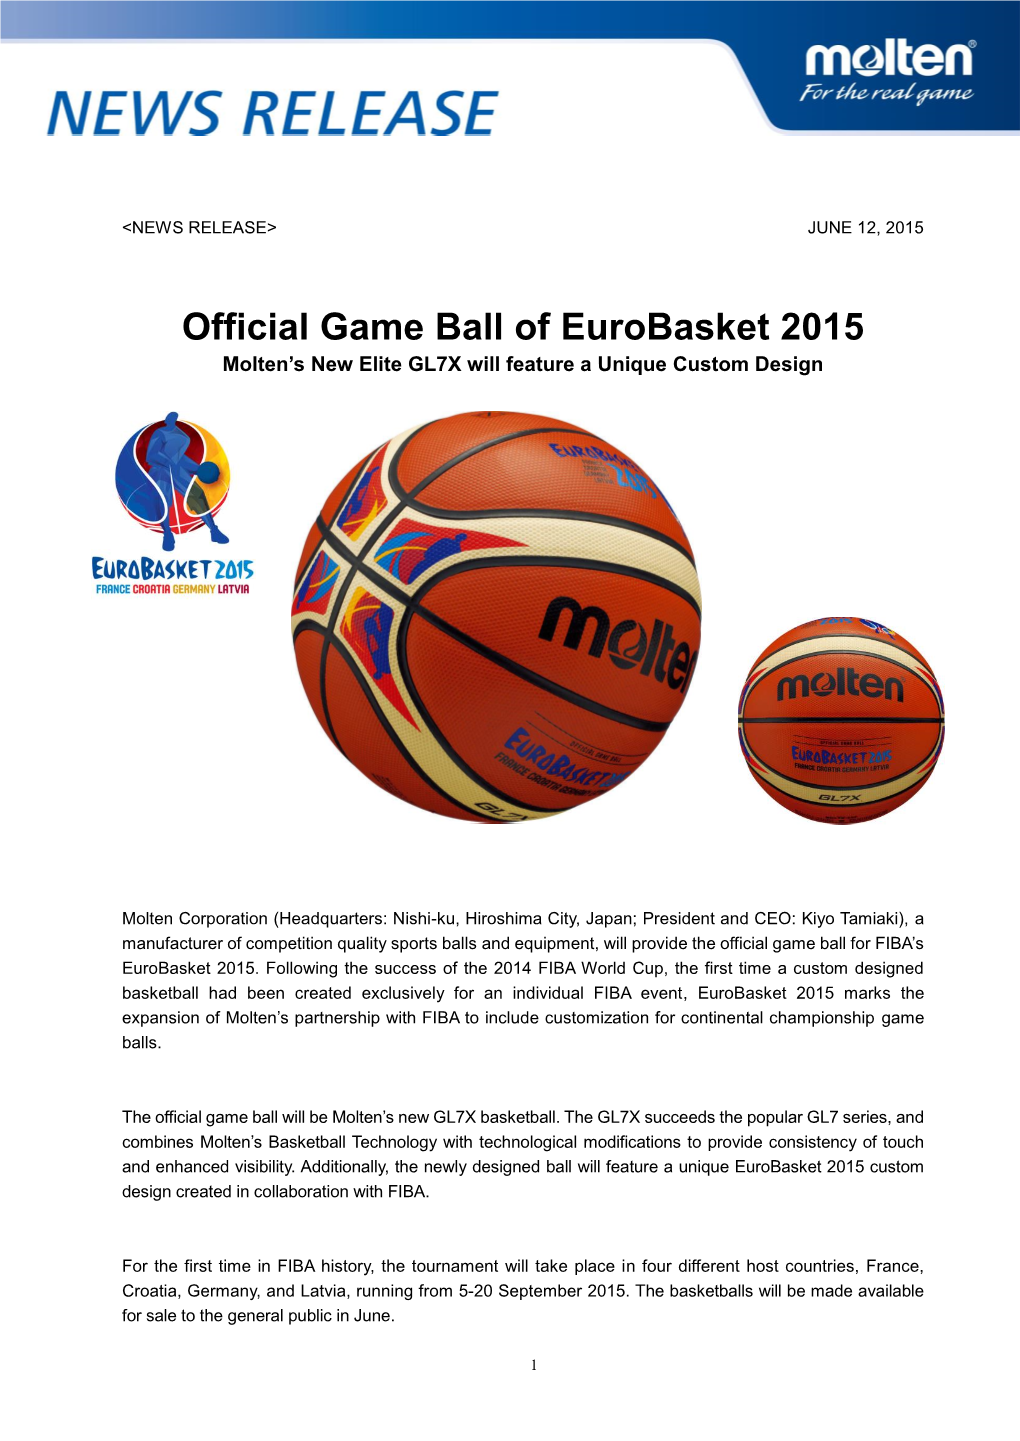 "BGL7X" Will Be the Official Basketball of FIBA Eurobasket 2015, Which Will